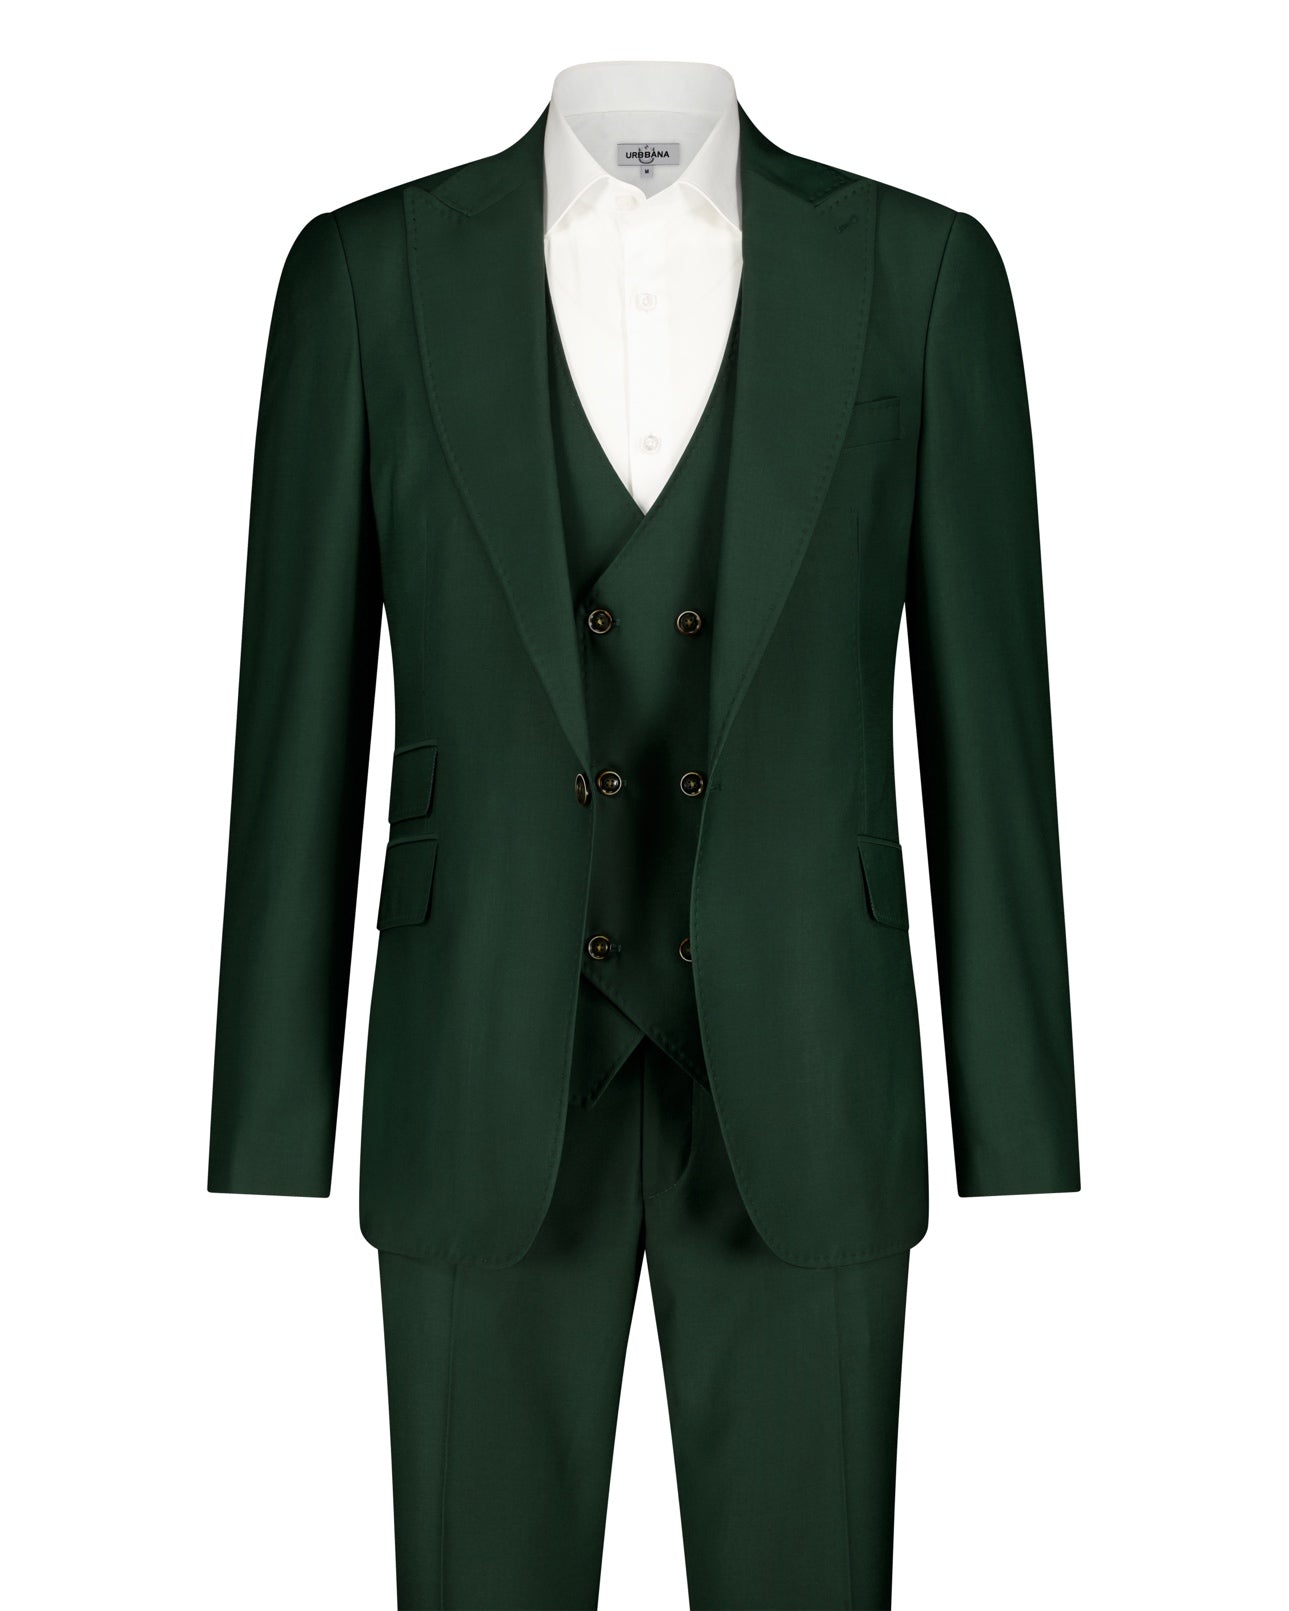 Jeremy Suit - Forest Green